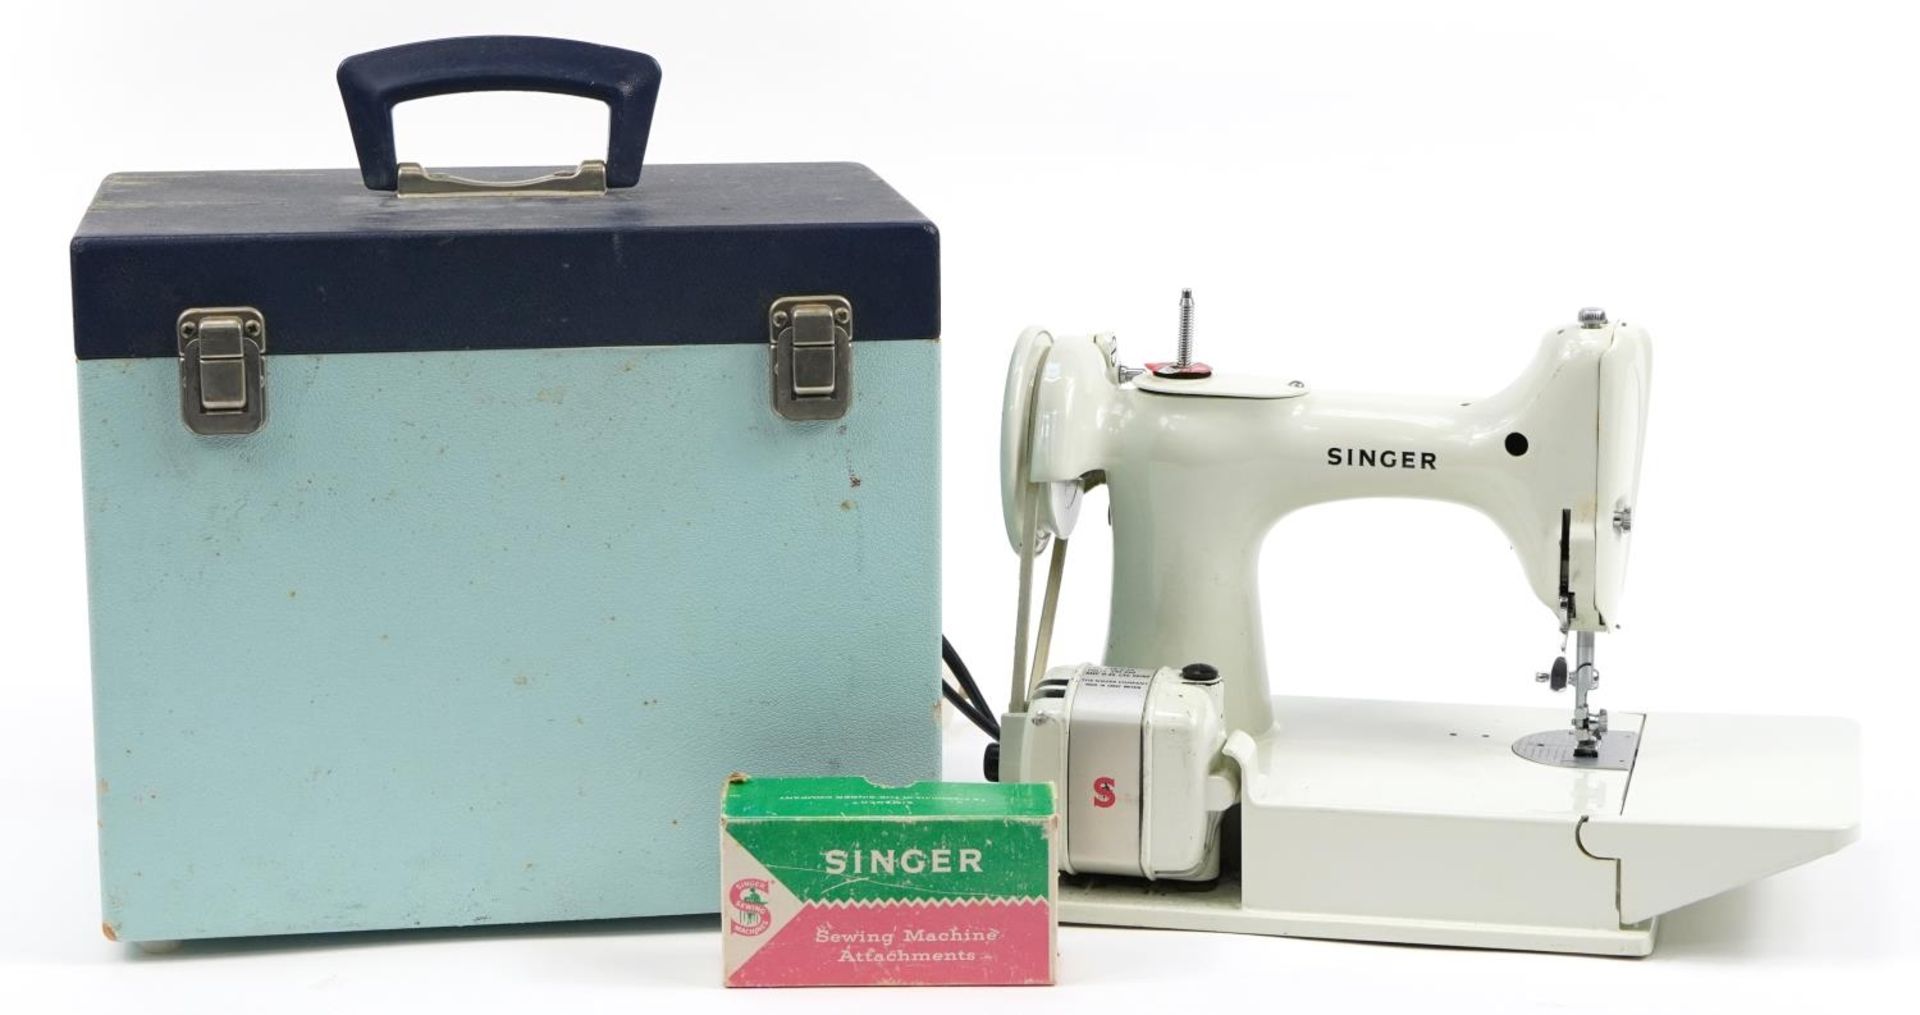 Vintage enamelled Singer sewing machine model 221K with pale turquoise case